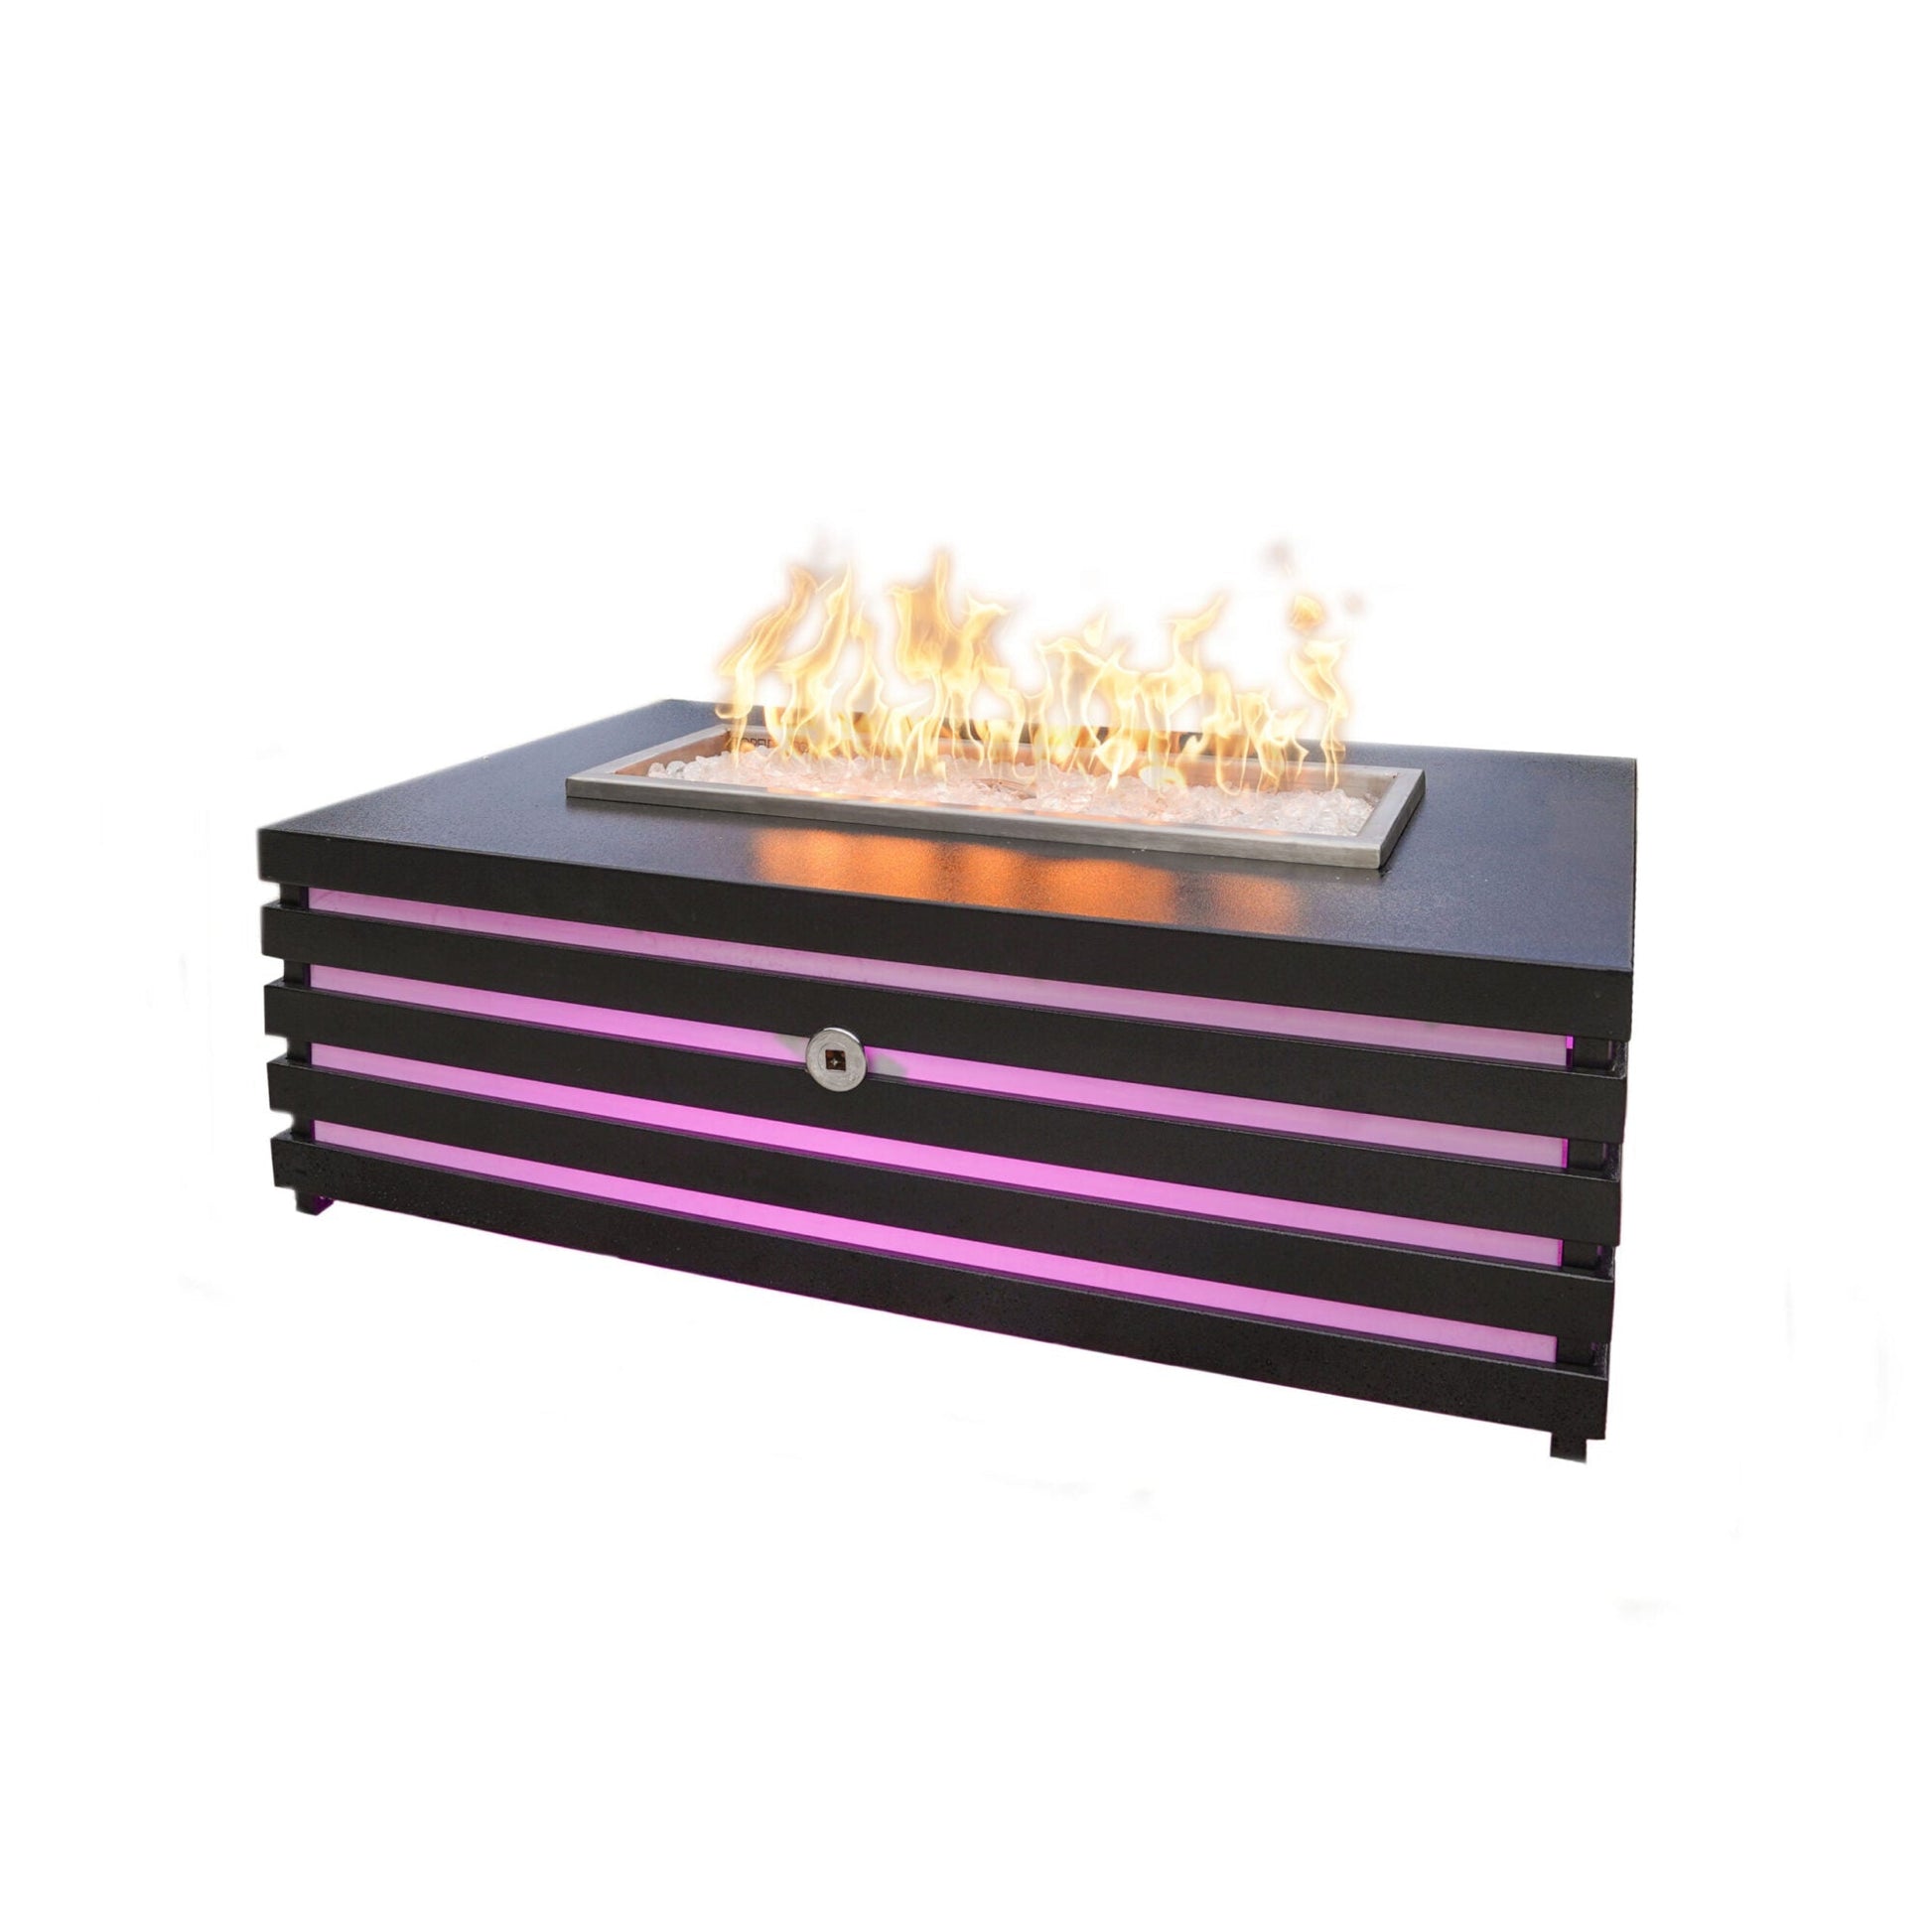 The Outdoor Plus Amina 72" Black Powder Coated Natural Gas Fire Pit with Flame Sense with Spark Ignition